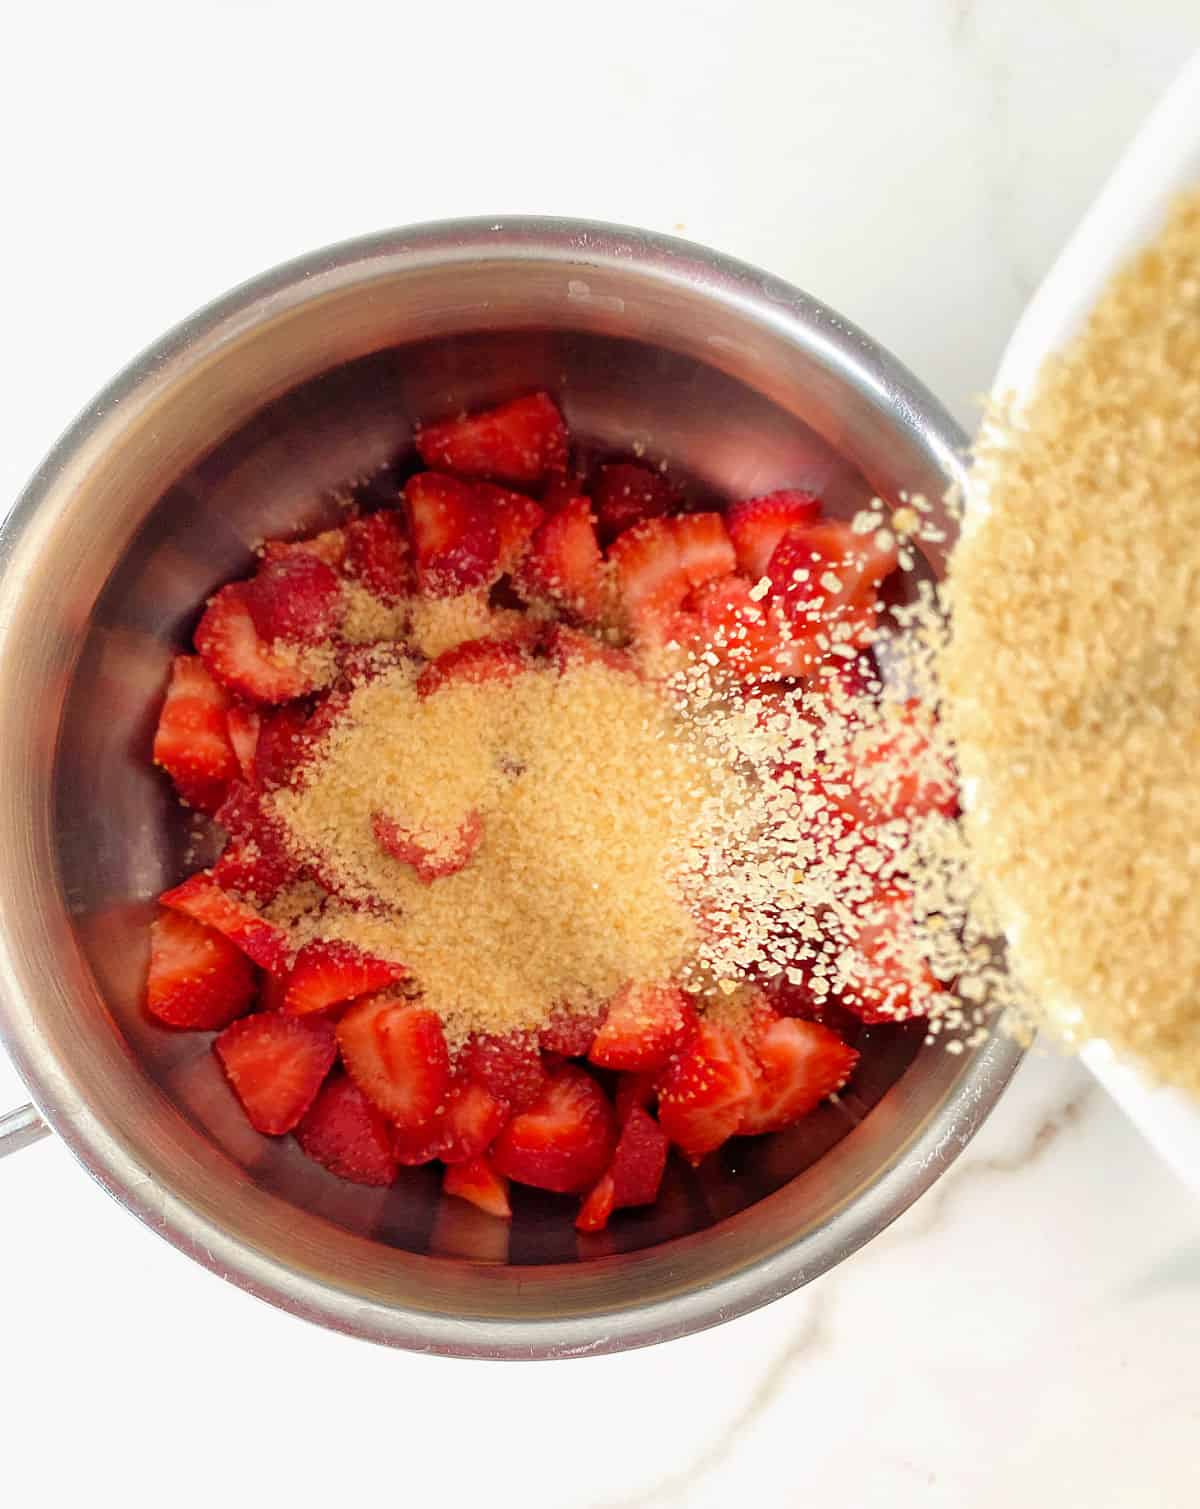 Adding light brown sugar to metal saucepan with chopped strawberries, white background